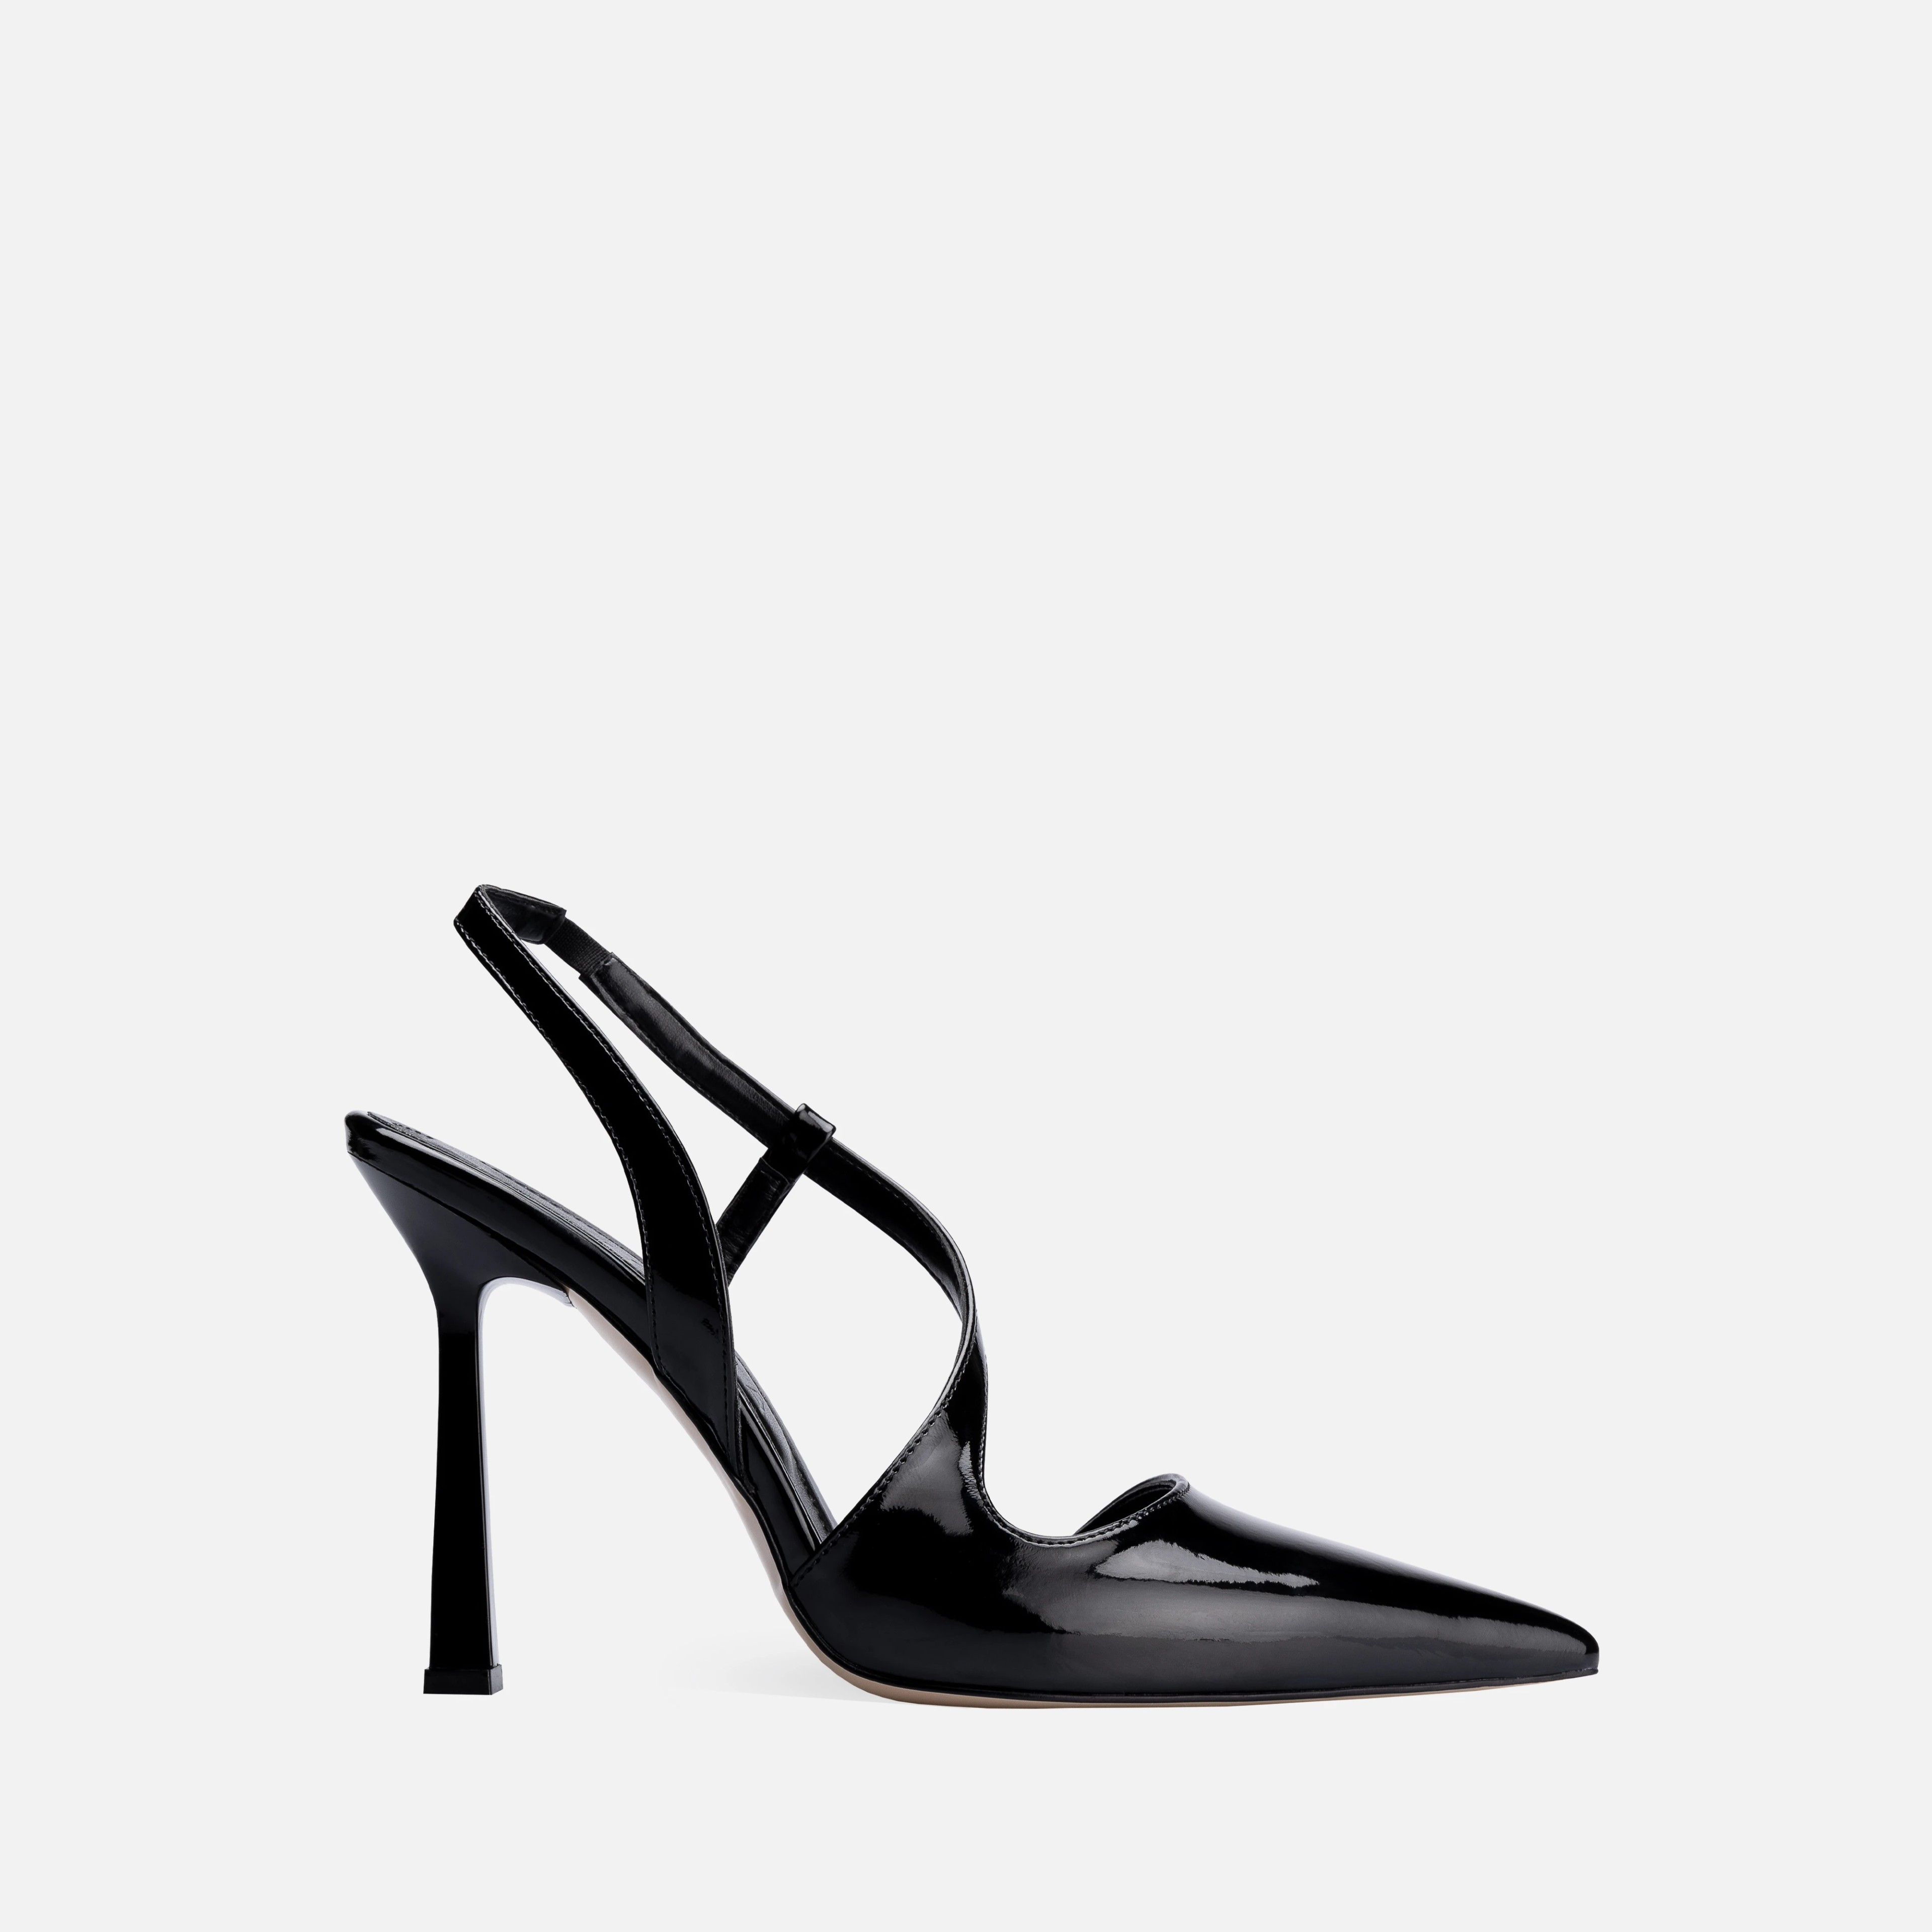 Patent Leather Thin High Heeled Pumps - Black